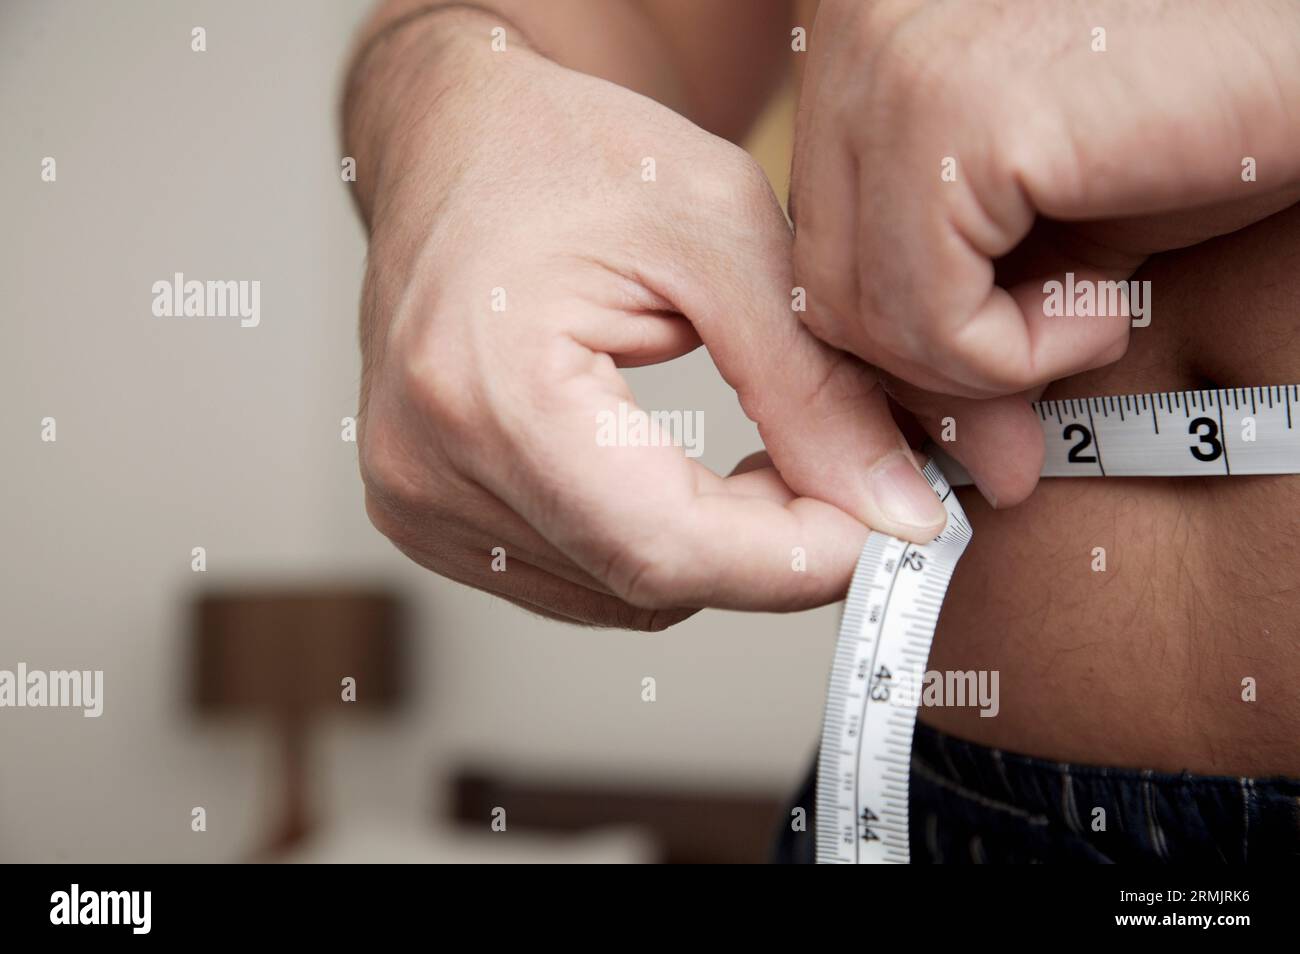 Close up of man measuring waist with tape measure Stock Photo